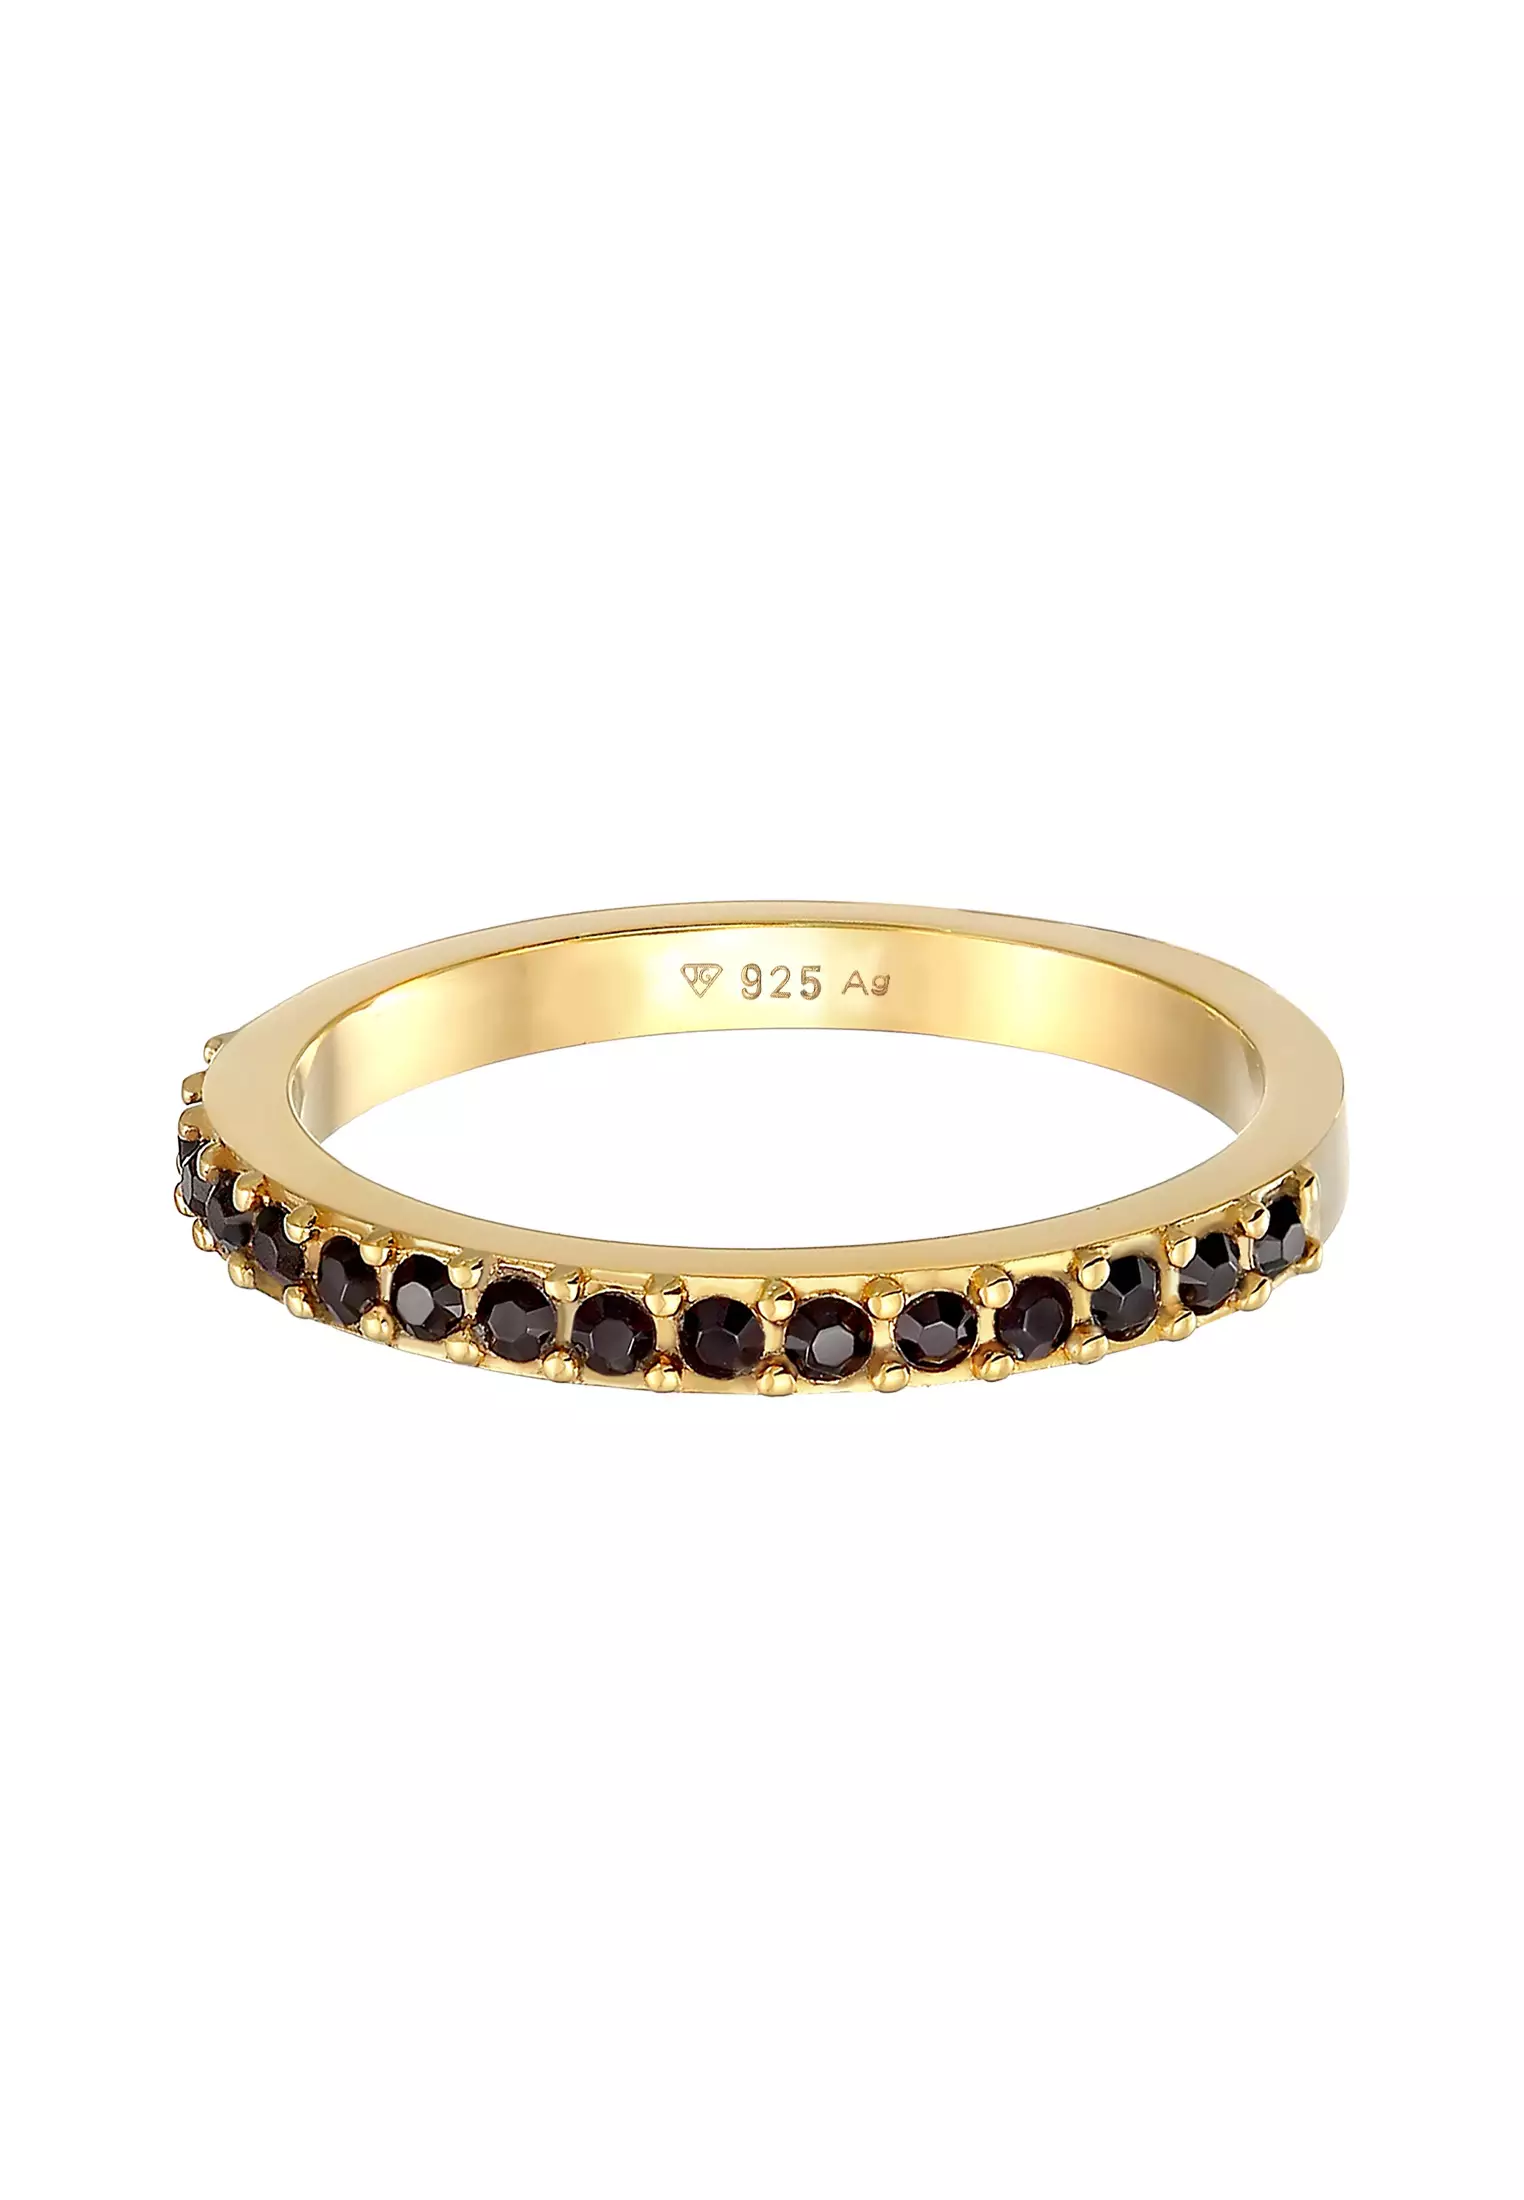 Buy ELLI GERMANY Ring Band Online Plated Crystals Malaysia ZALORA | Memoire Gold